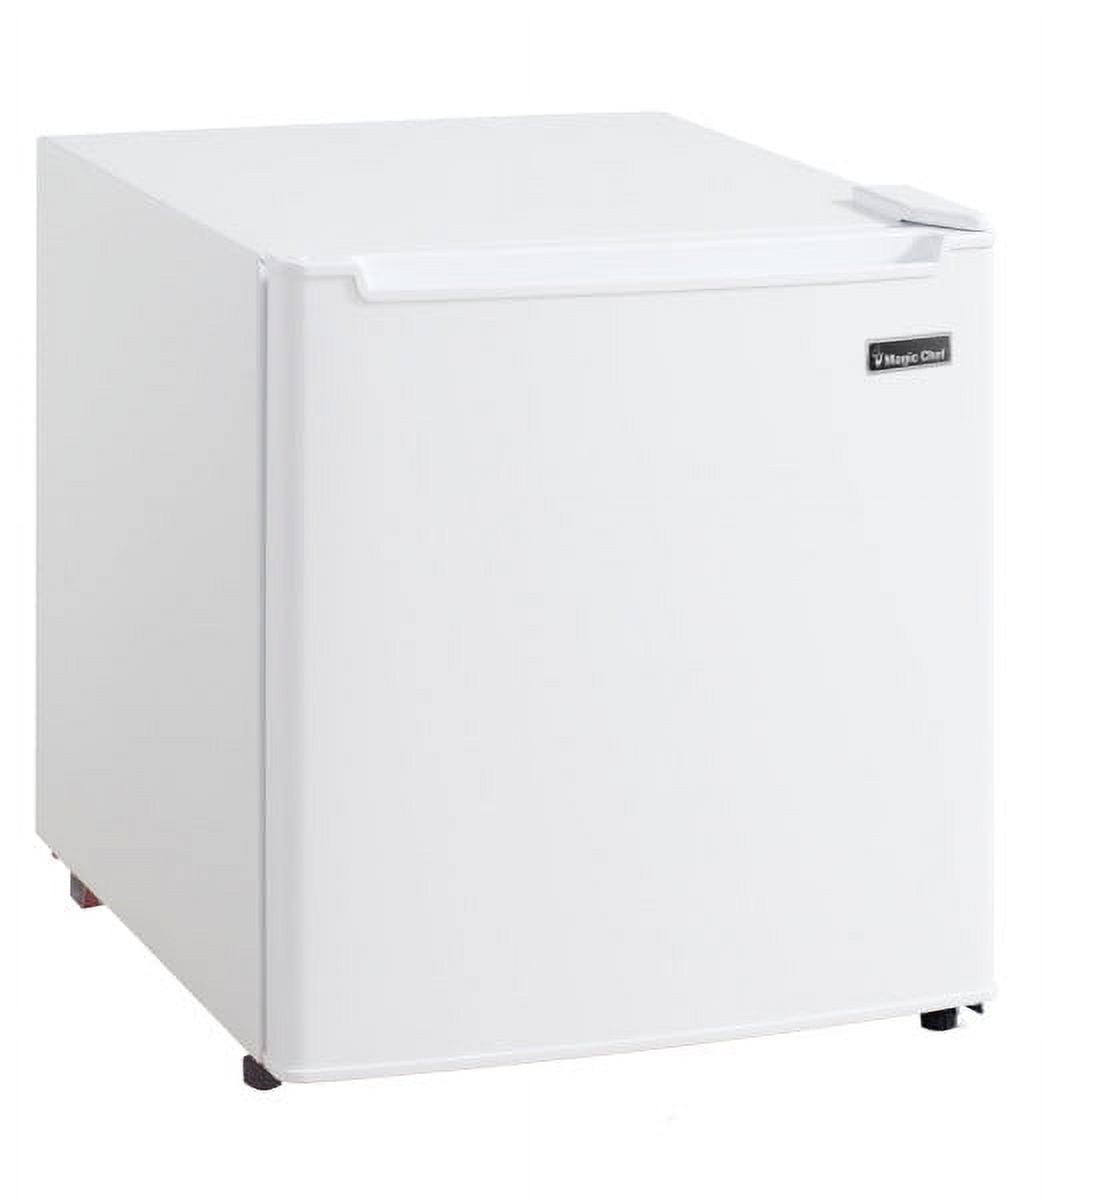 1.7 Cu. Ft. Mini Refrigerator With Chiller Compartment - White